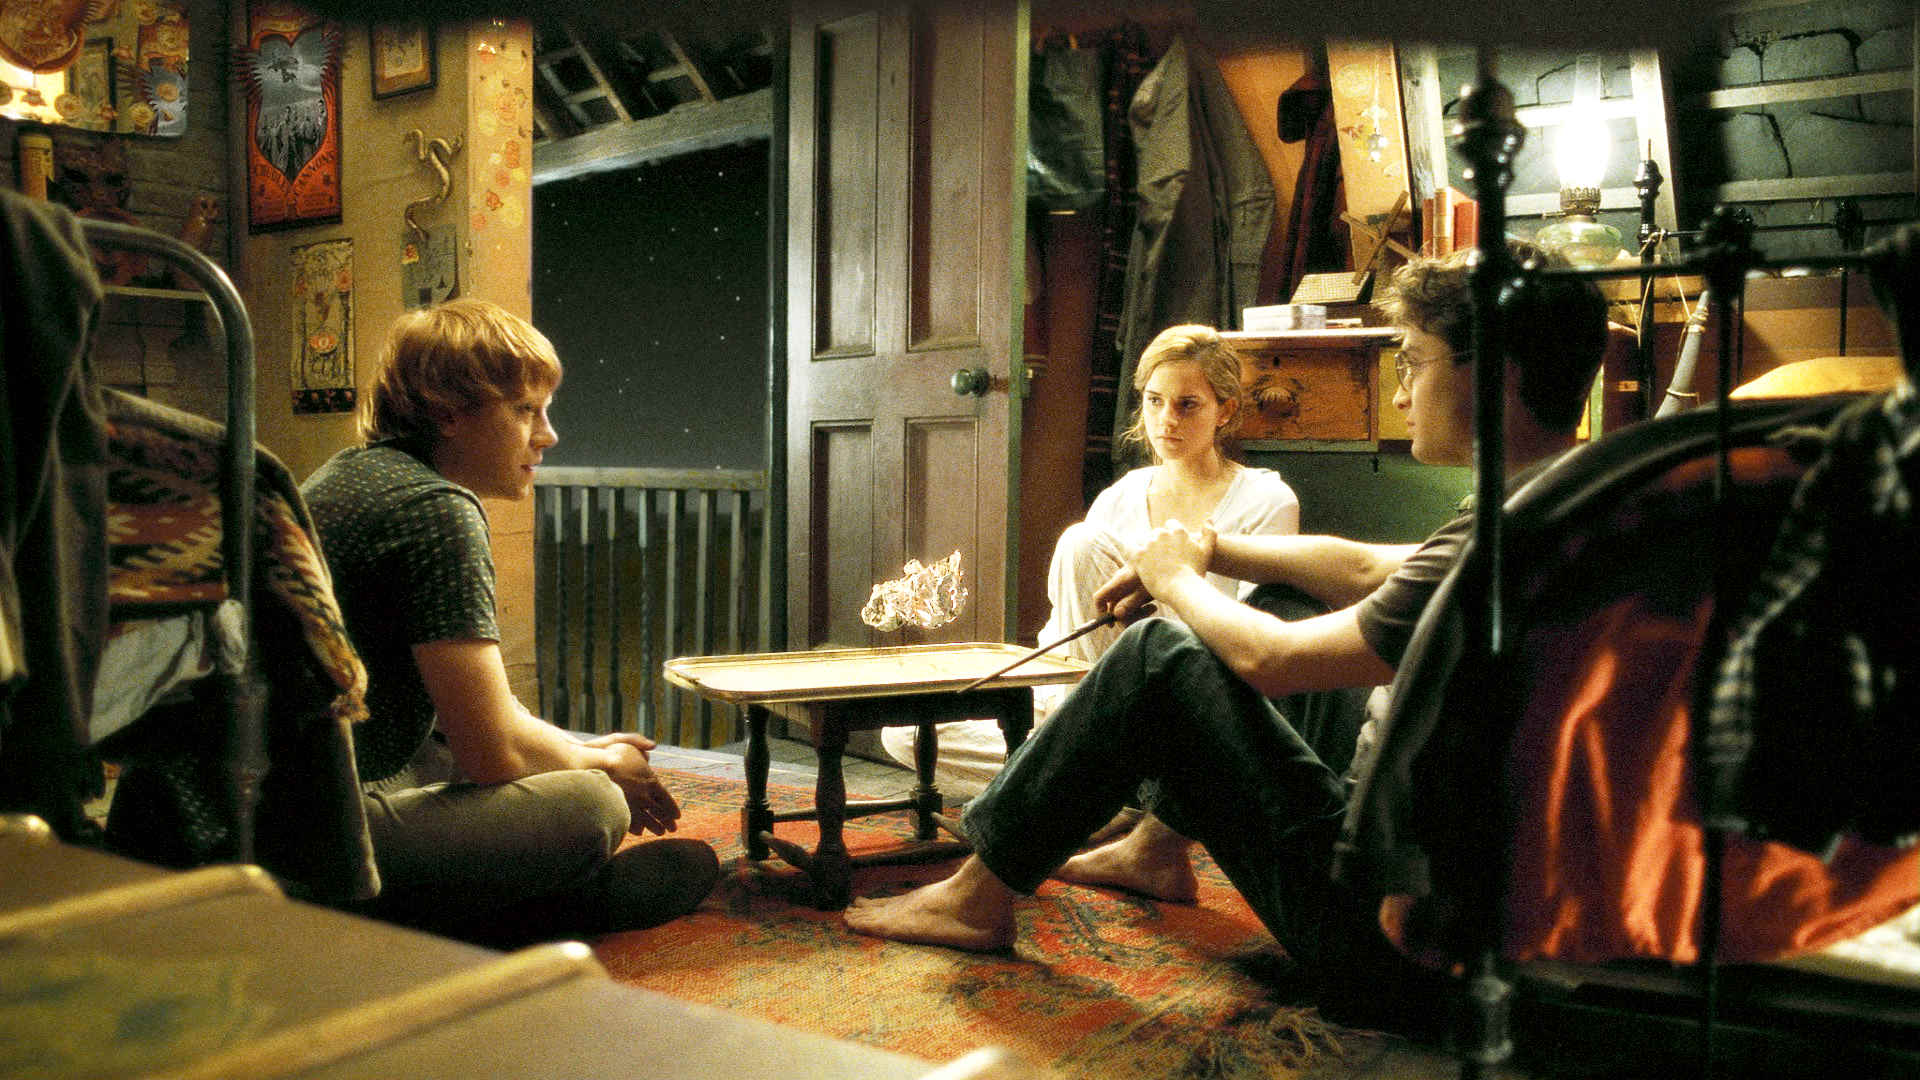 Rupert Grint, Emma Watson and Daniel Radcliffe in Warner Bros' Harry Potter and the Half-Blood Prince (2009)